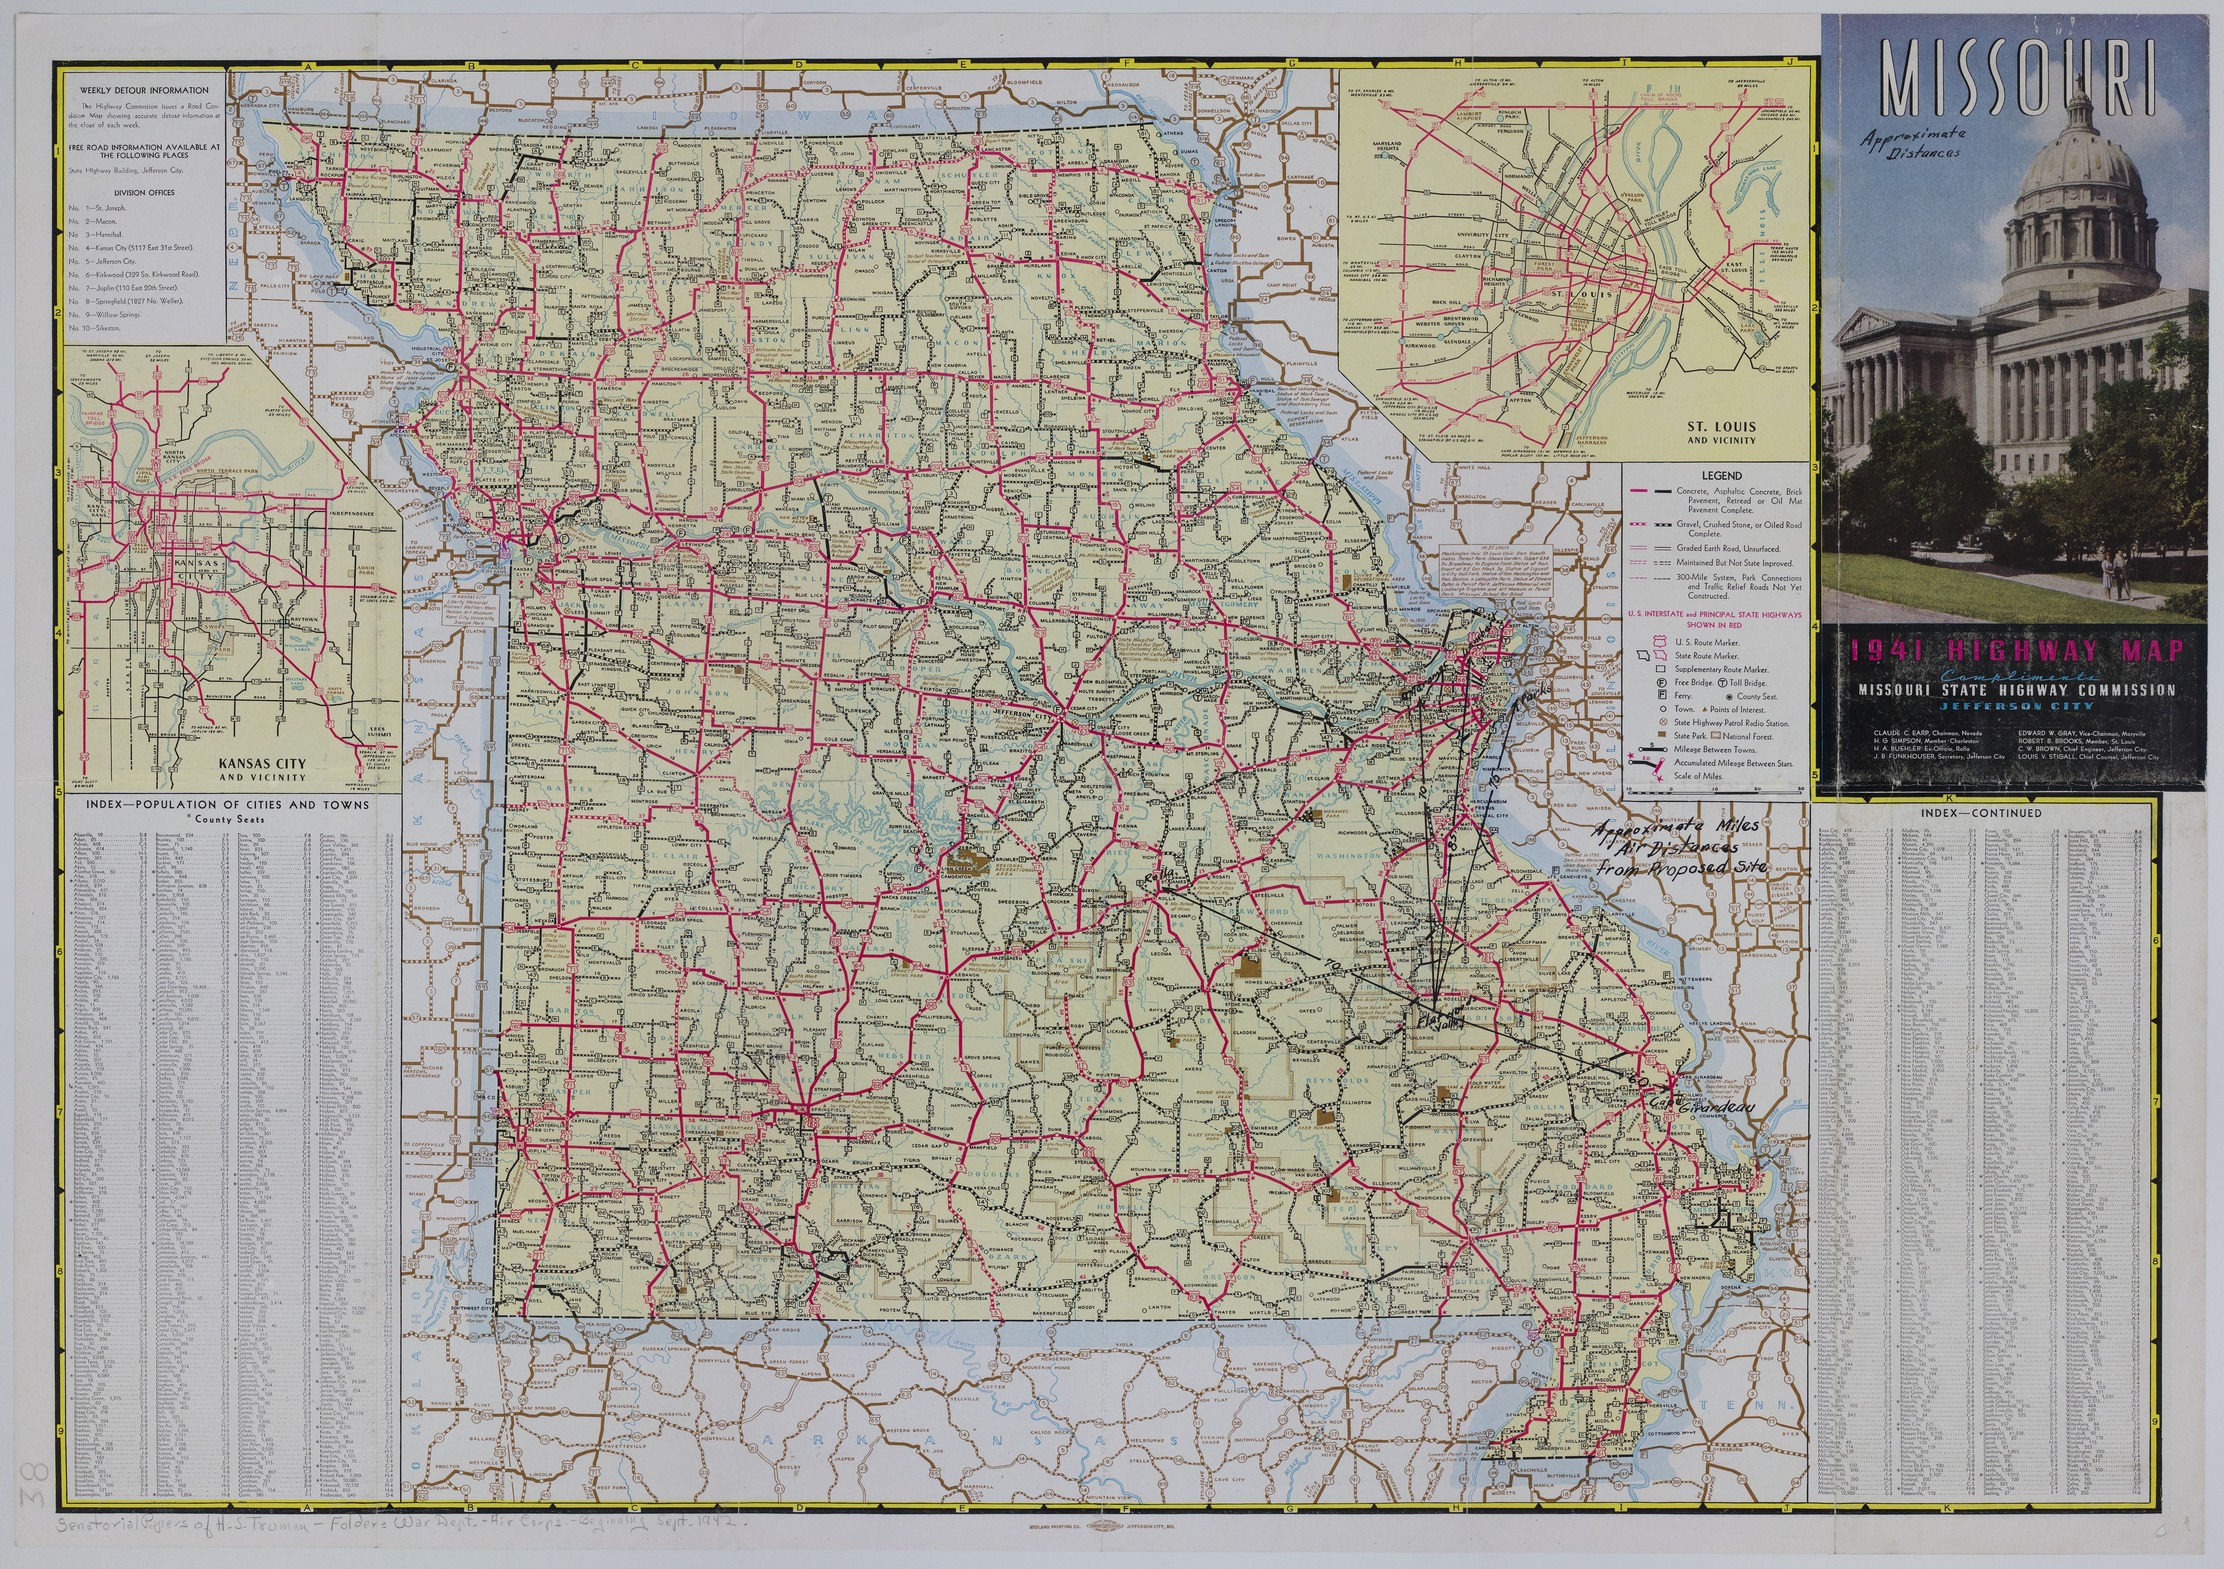 Map of Distances from a Proposed Airfield in Iron County, Missouri to Principal Cities